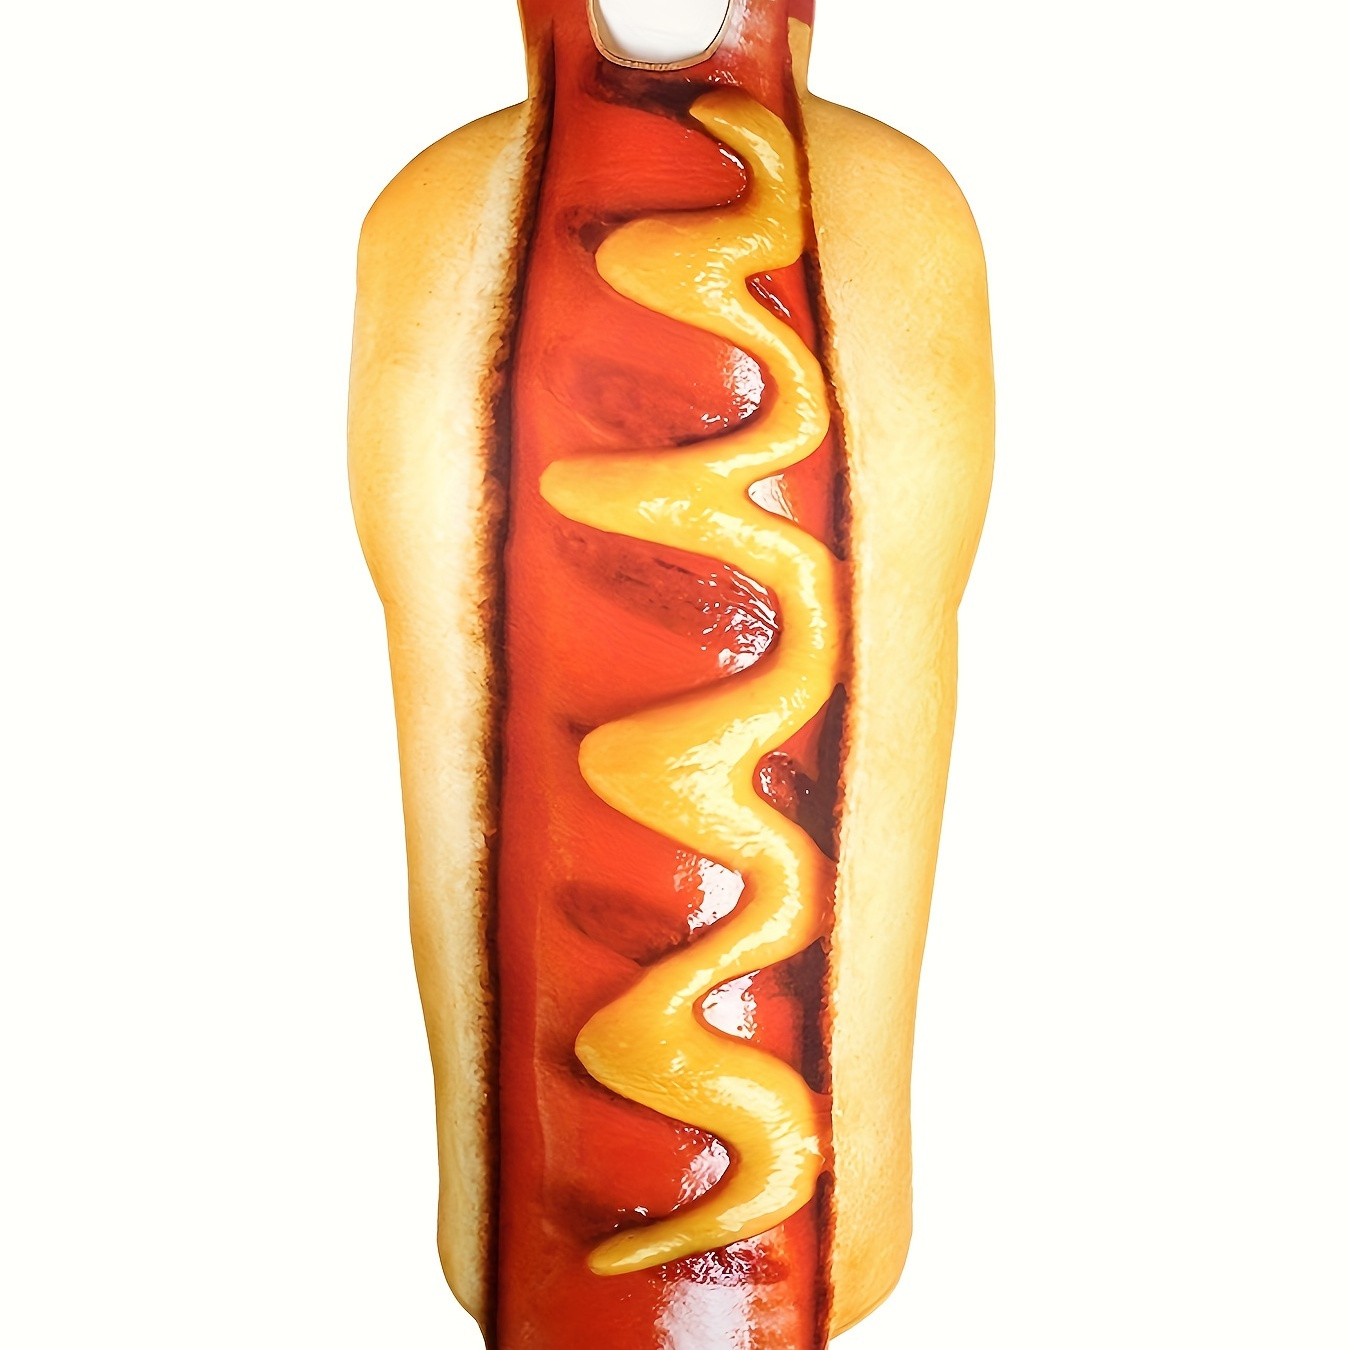 

Men's Giant Hot Dog Print Costume, Sausage Cosplay Outfit, Halloween Party Dress Up, Fun Performance Prop